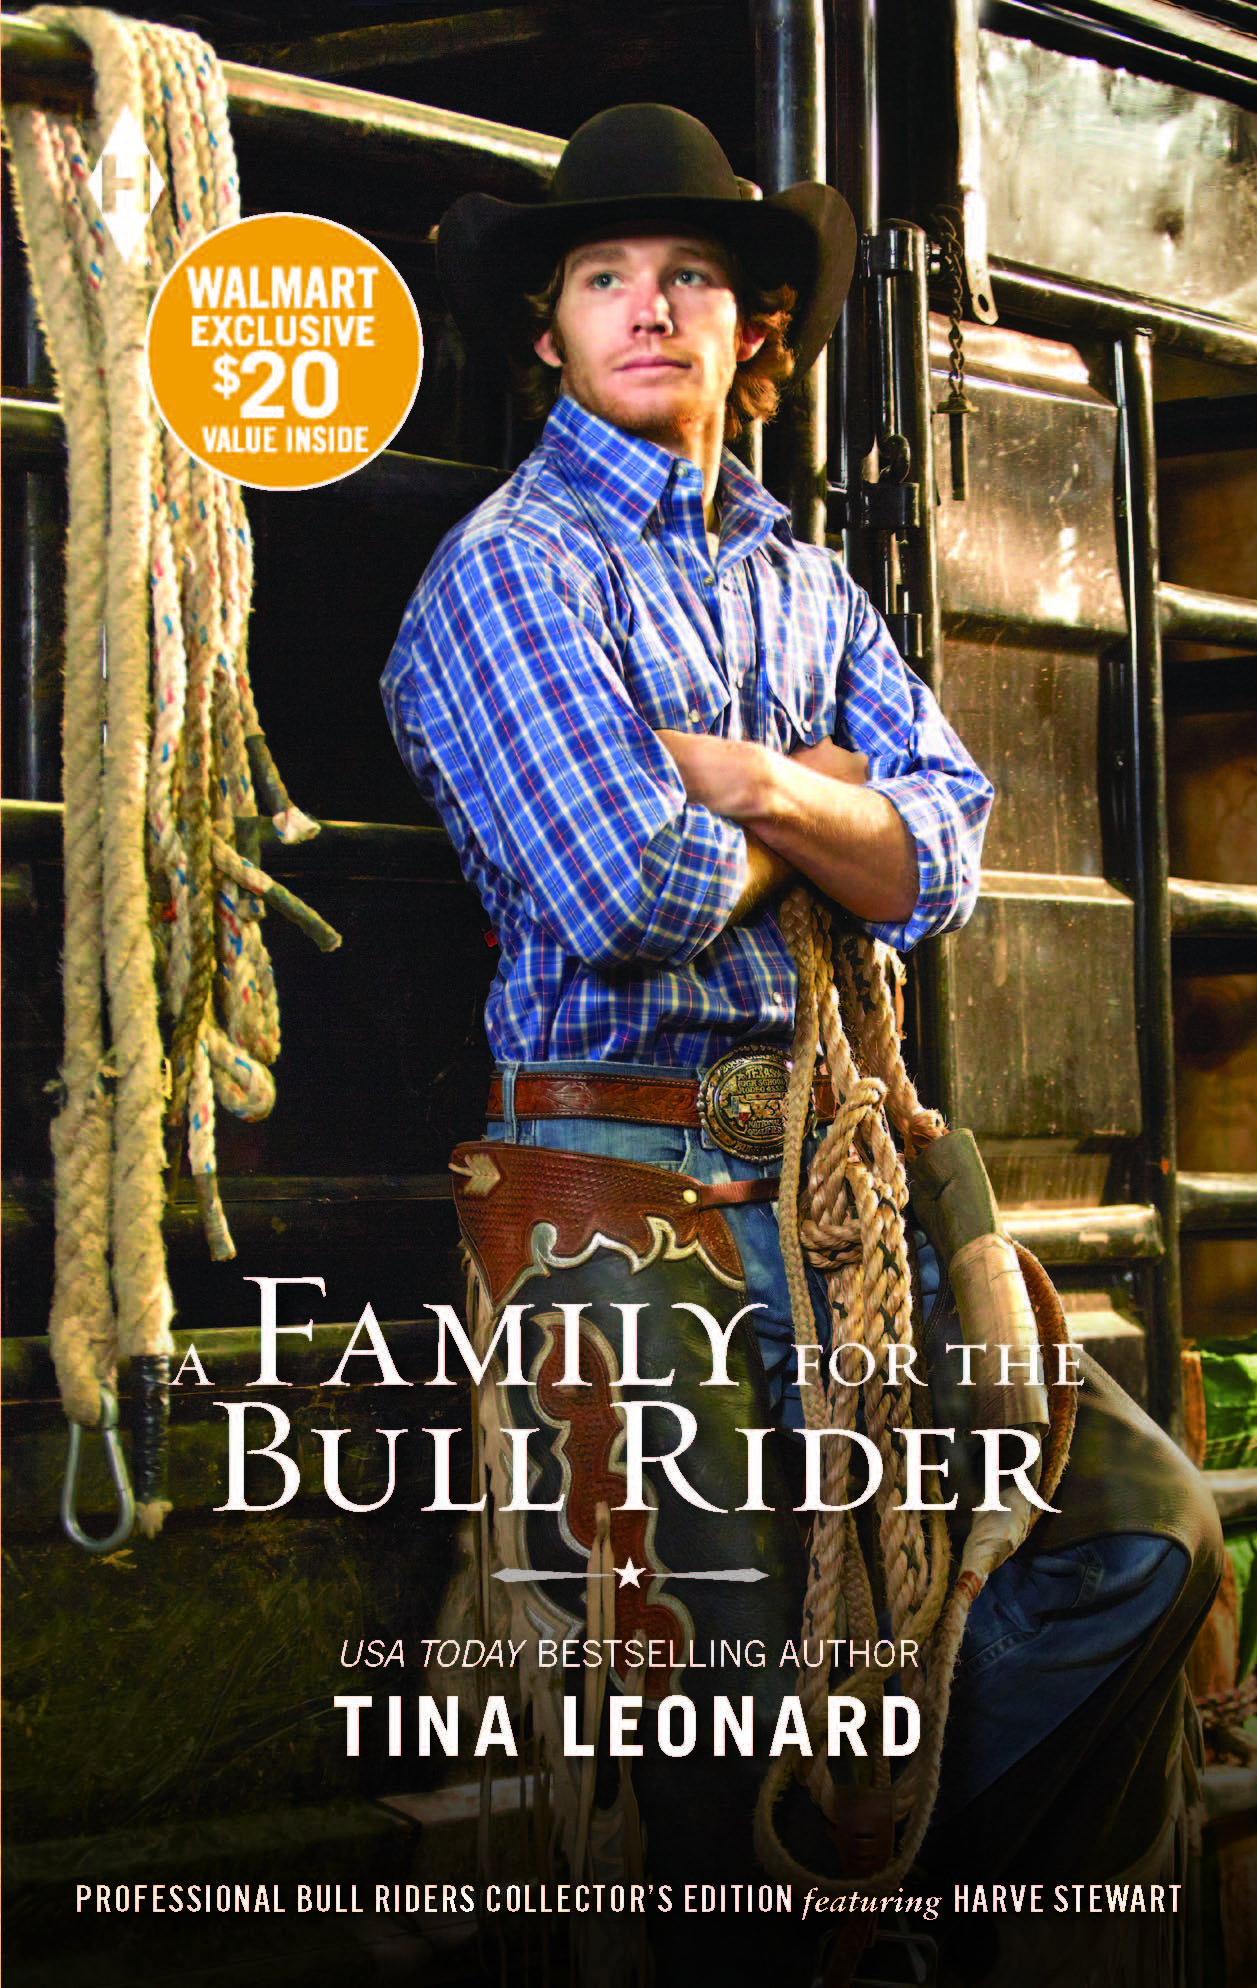 A Family
for the Bull Rider